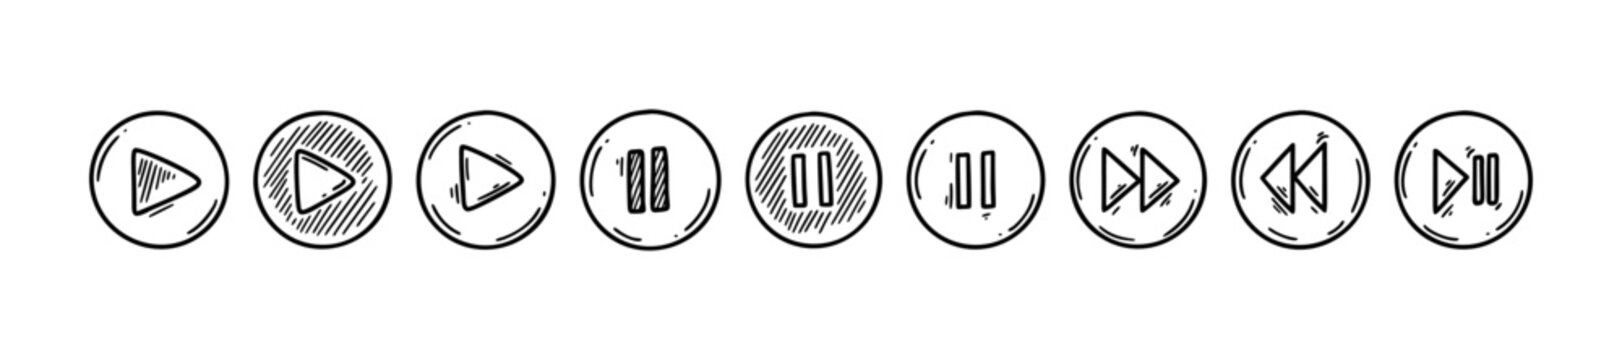 Doodle play, pause, rewind, stop, back buttons. Sketch video and audio computer and media player interface circle icons. Hand drawn music and movie pc symbols